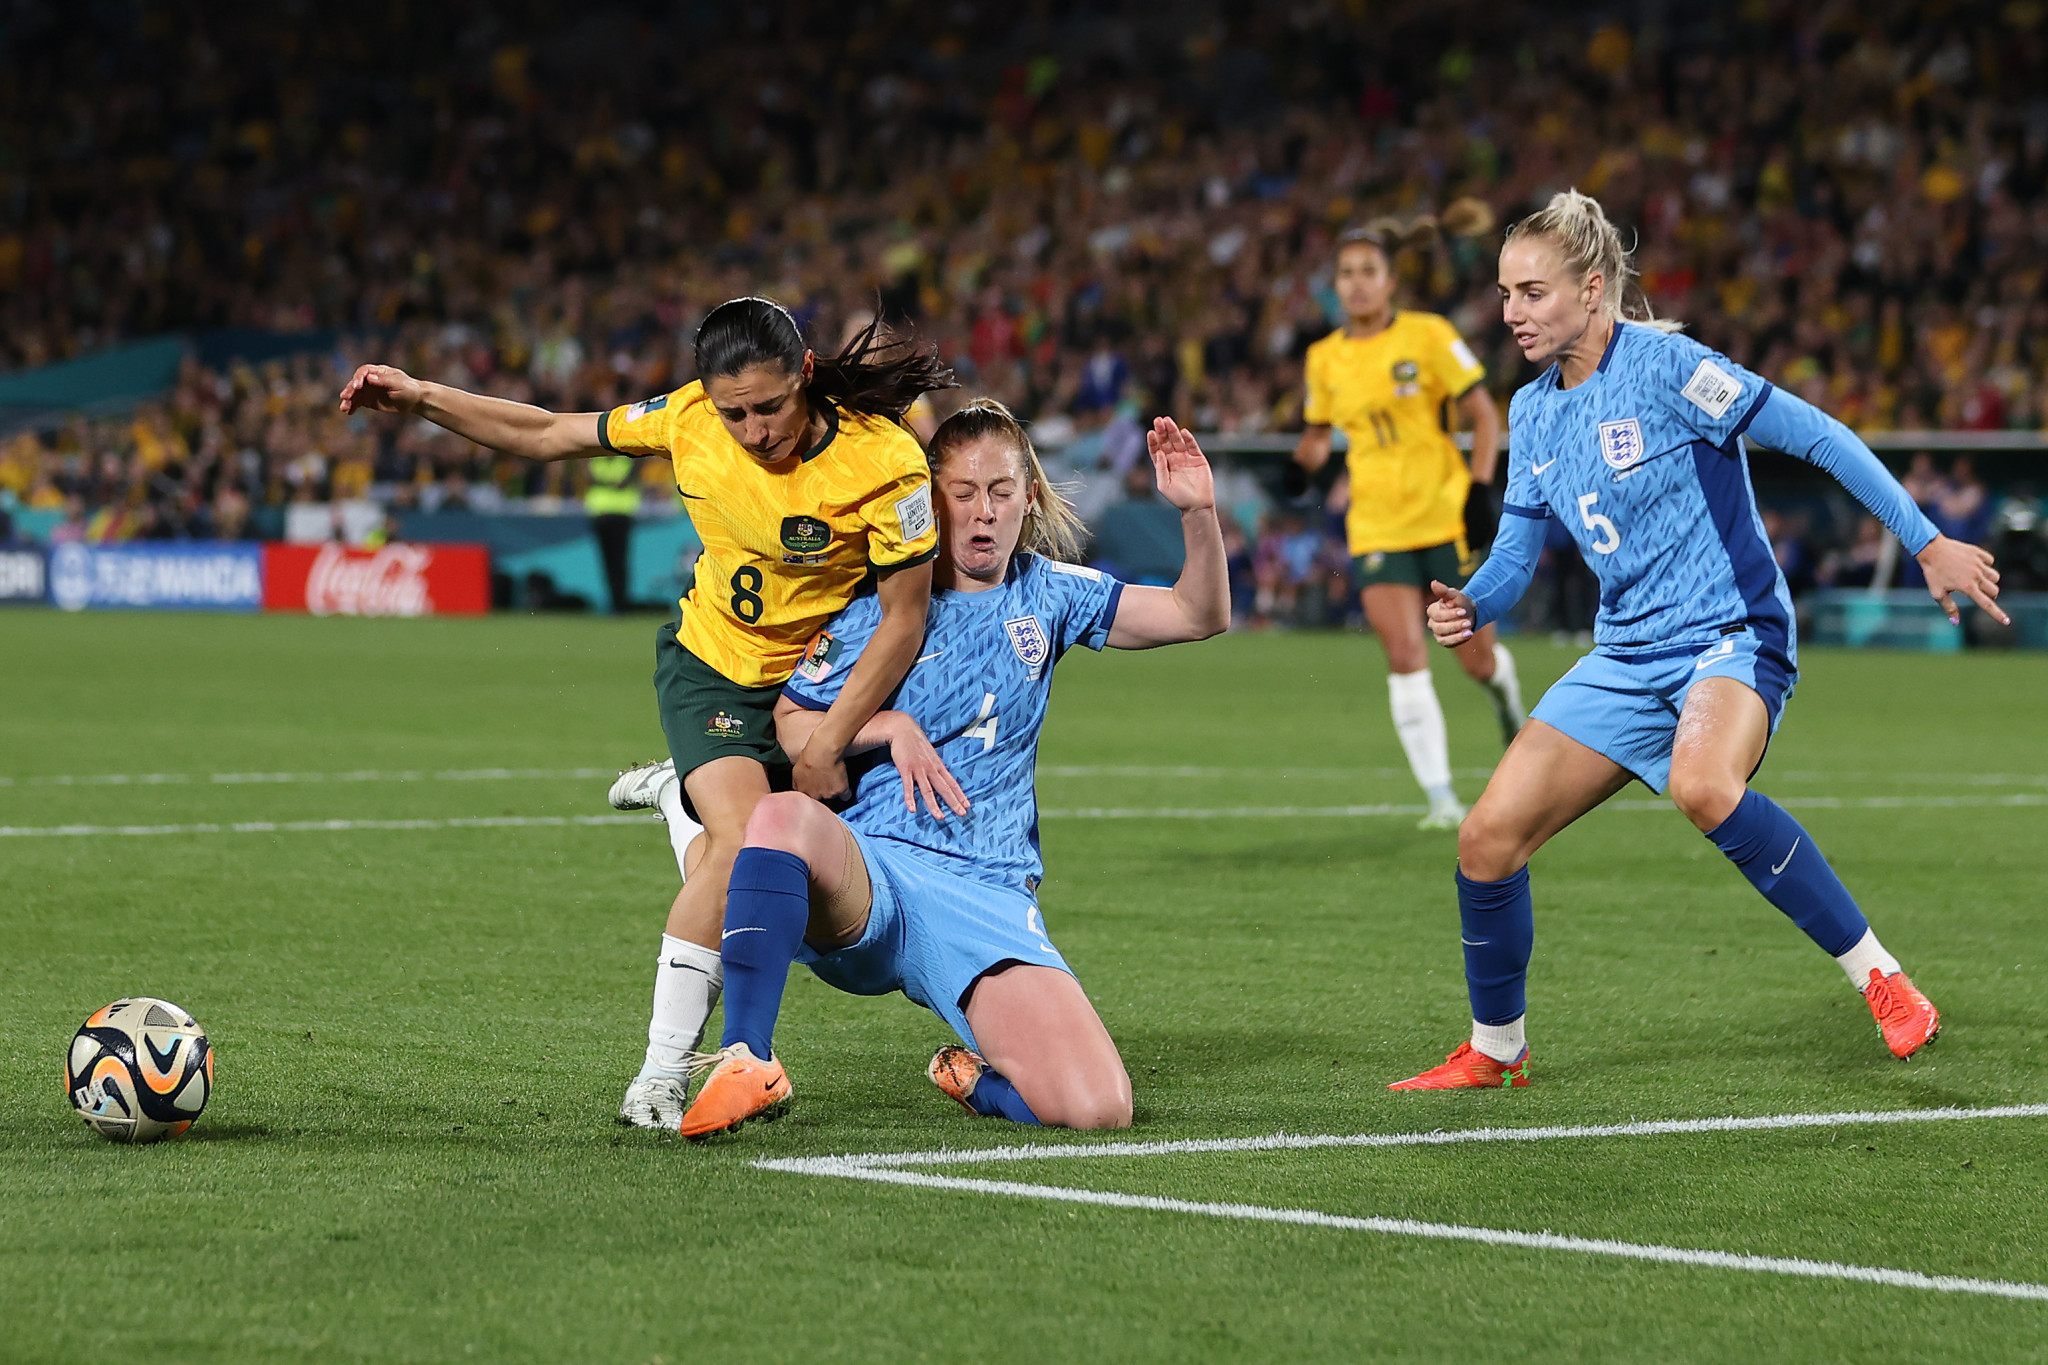 FIFA Women's World Cup semi-final results in record viewing figures in Australia just days after previous best set